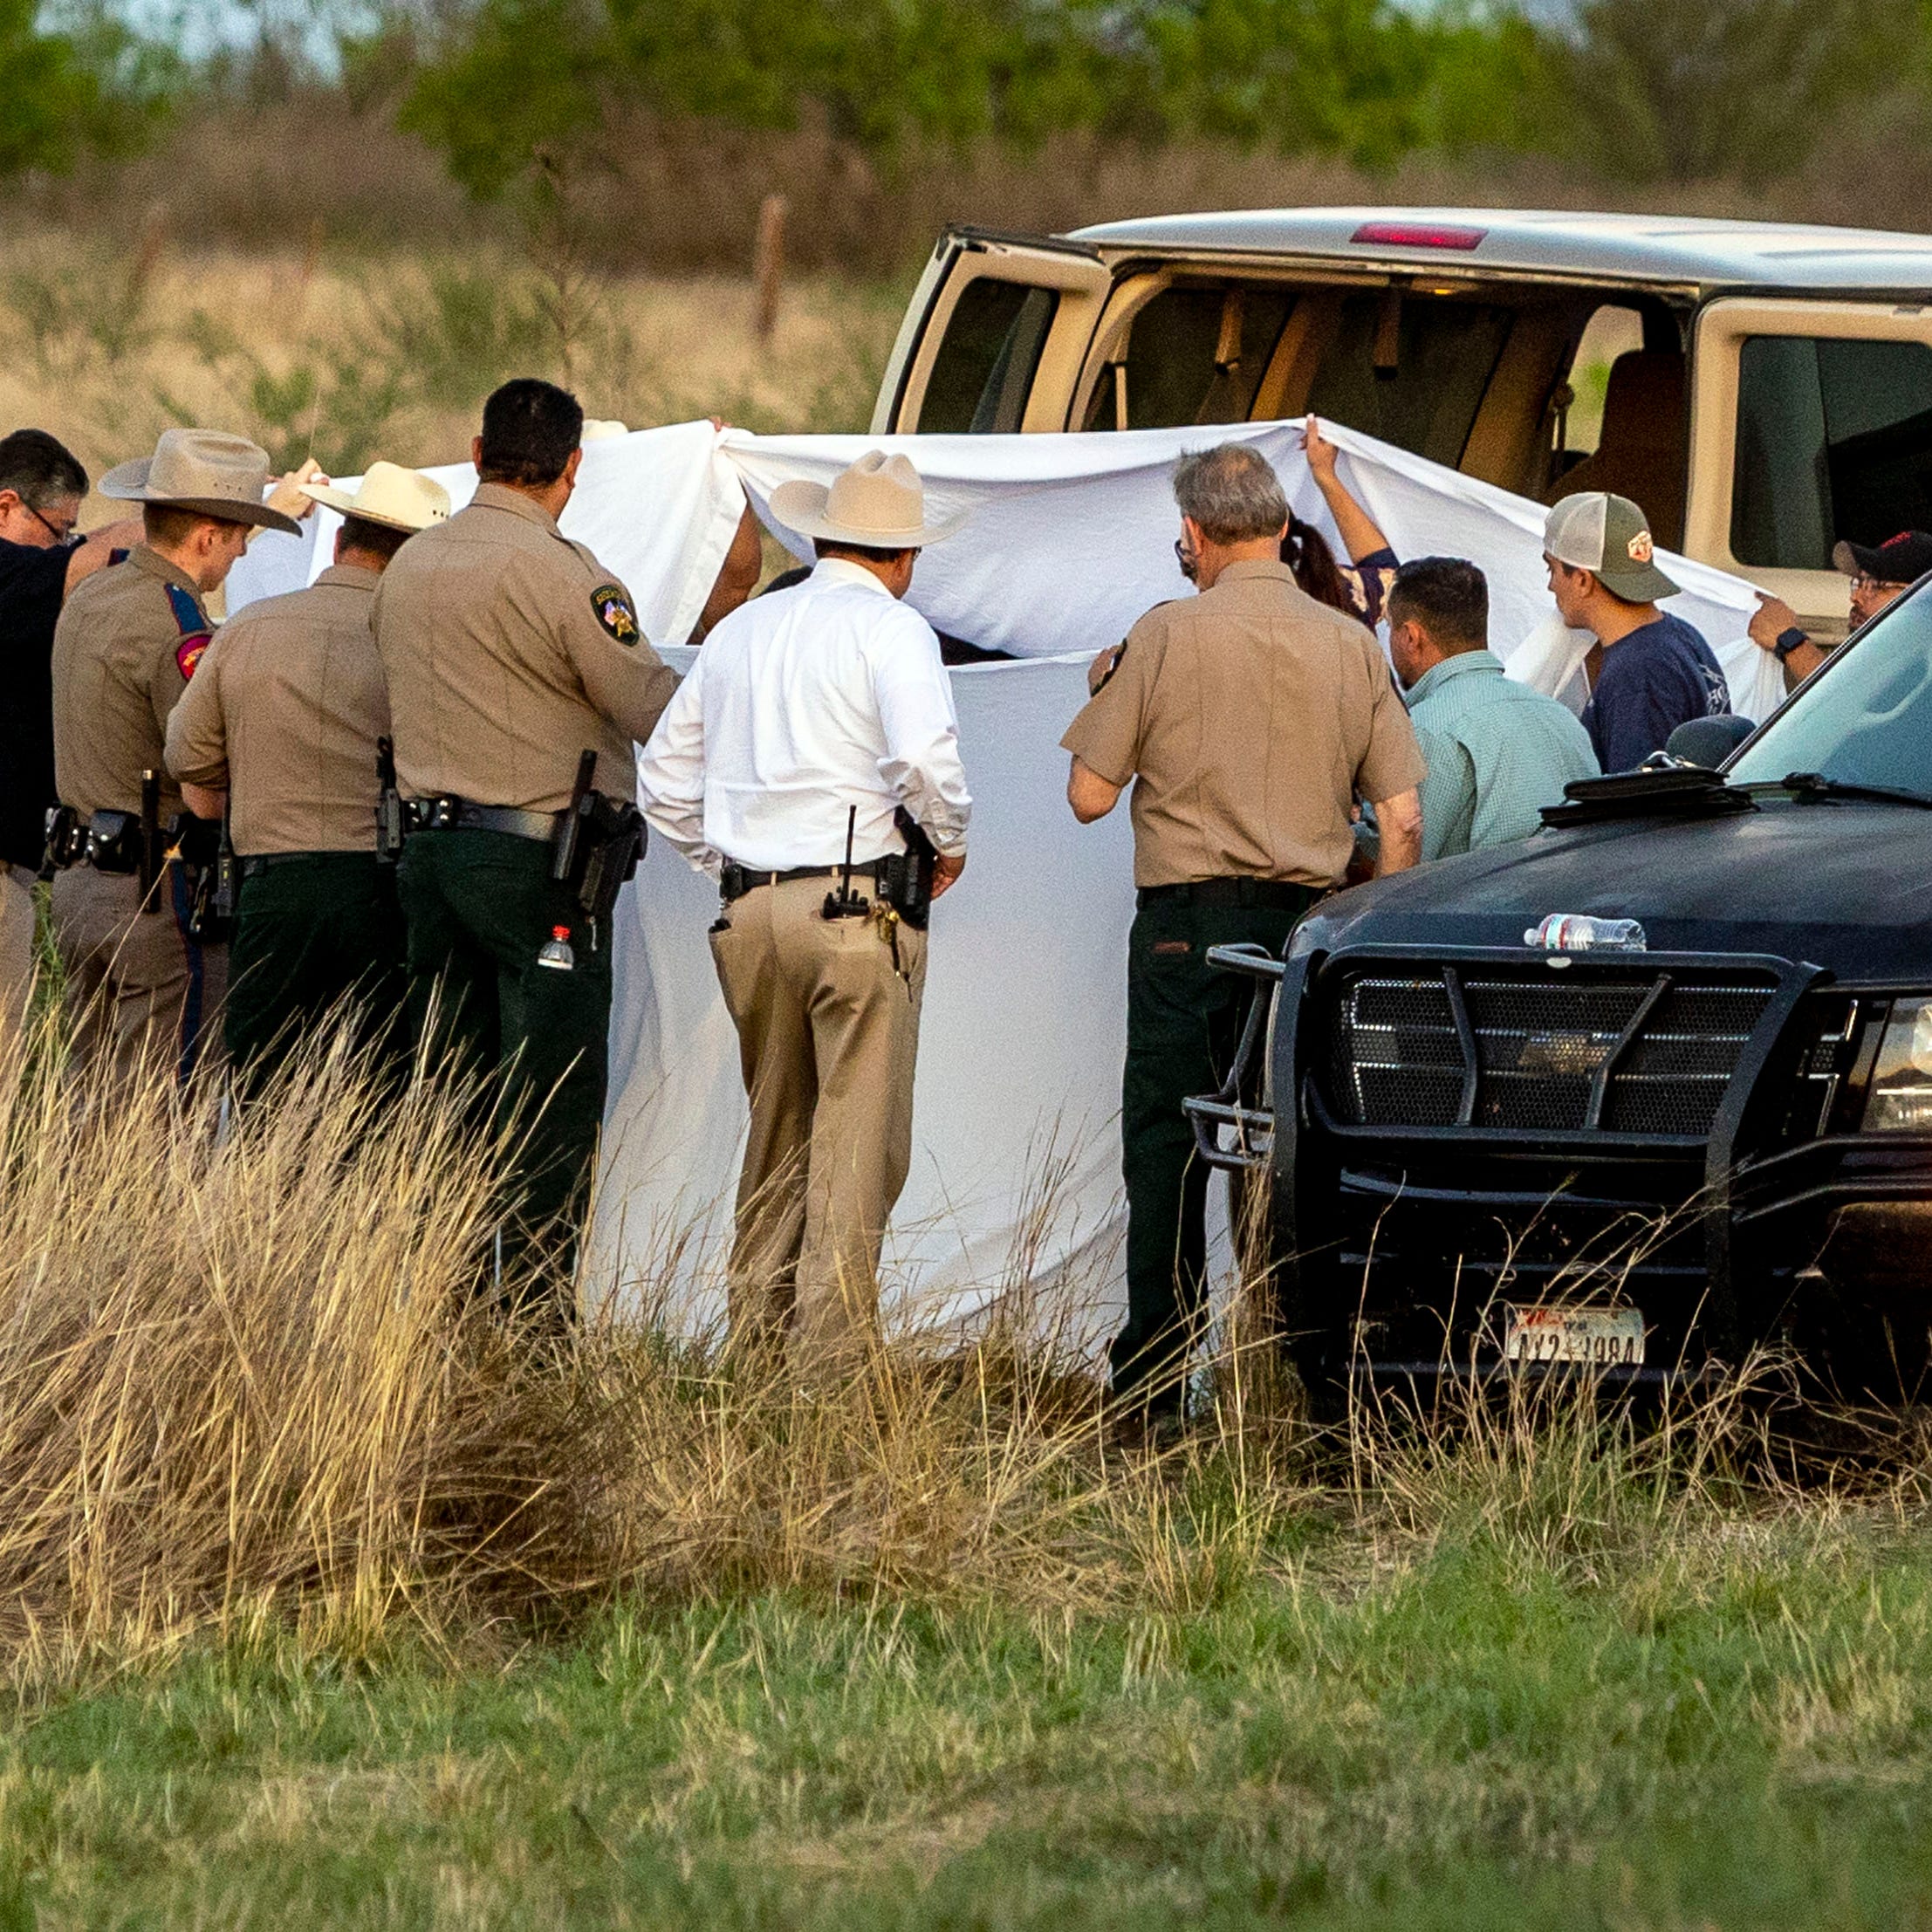 Officials investigate the scene where migrants were found trapped in a train car, Friday, March 24, 2023, in Uvalde, Texas. Union Pacific railroad said in a statement that the people were found in two cars on the train traveling east from Eagle Pass bound for San Antonio.